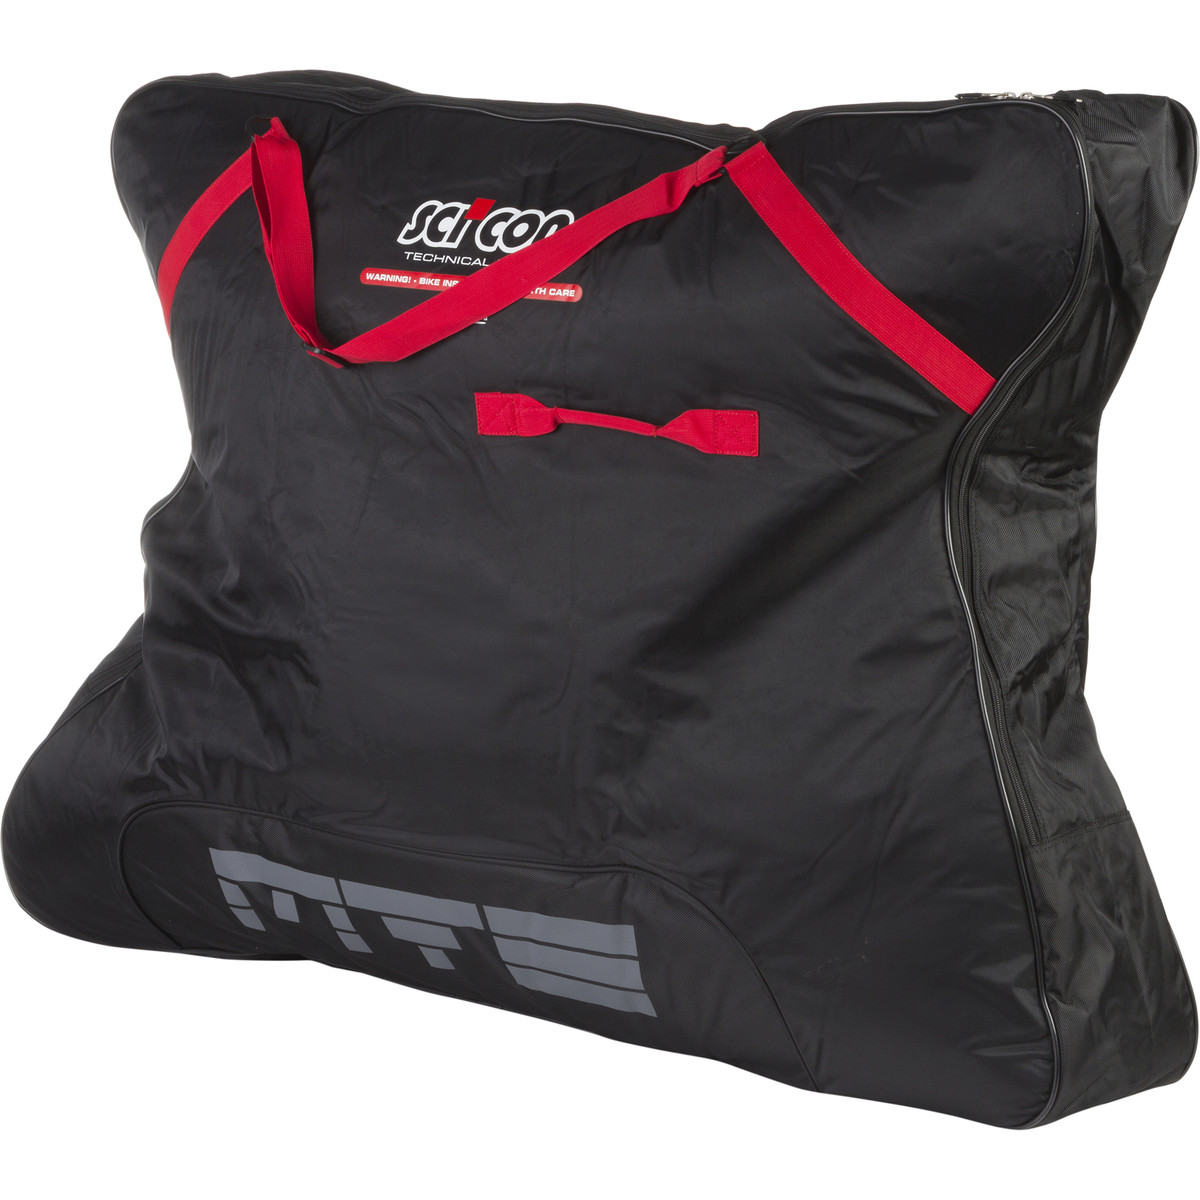 SciCon Cycle Bag Travel Plus MTB Black, One Size